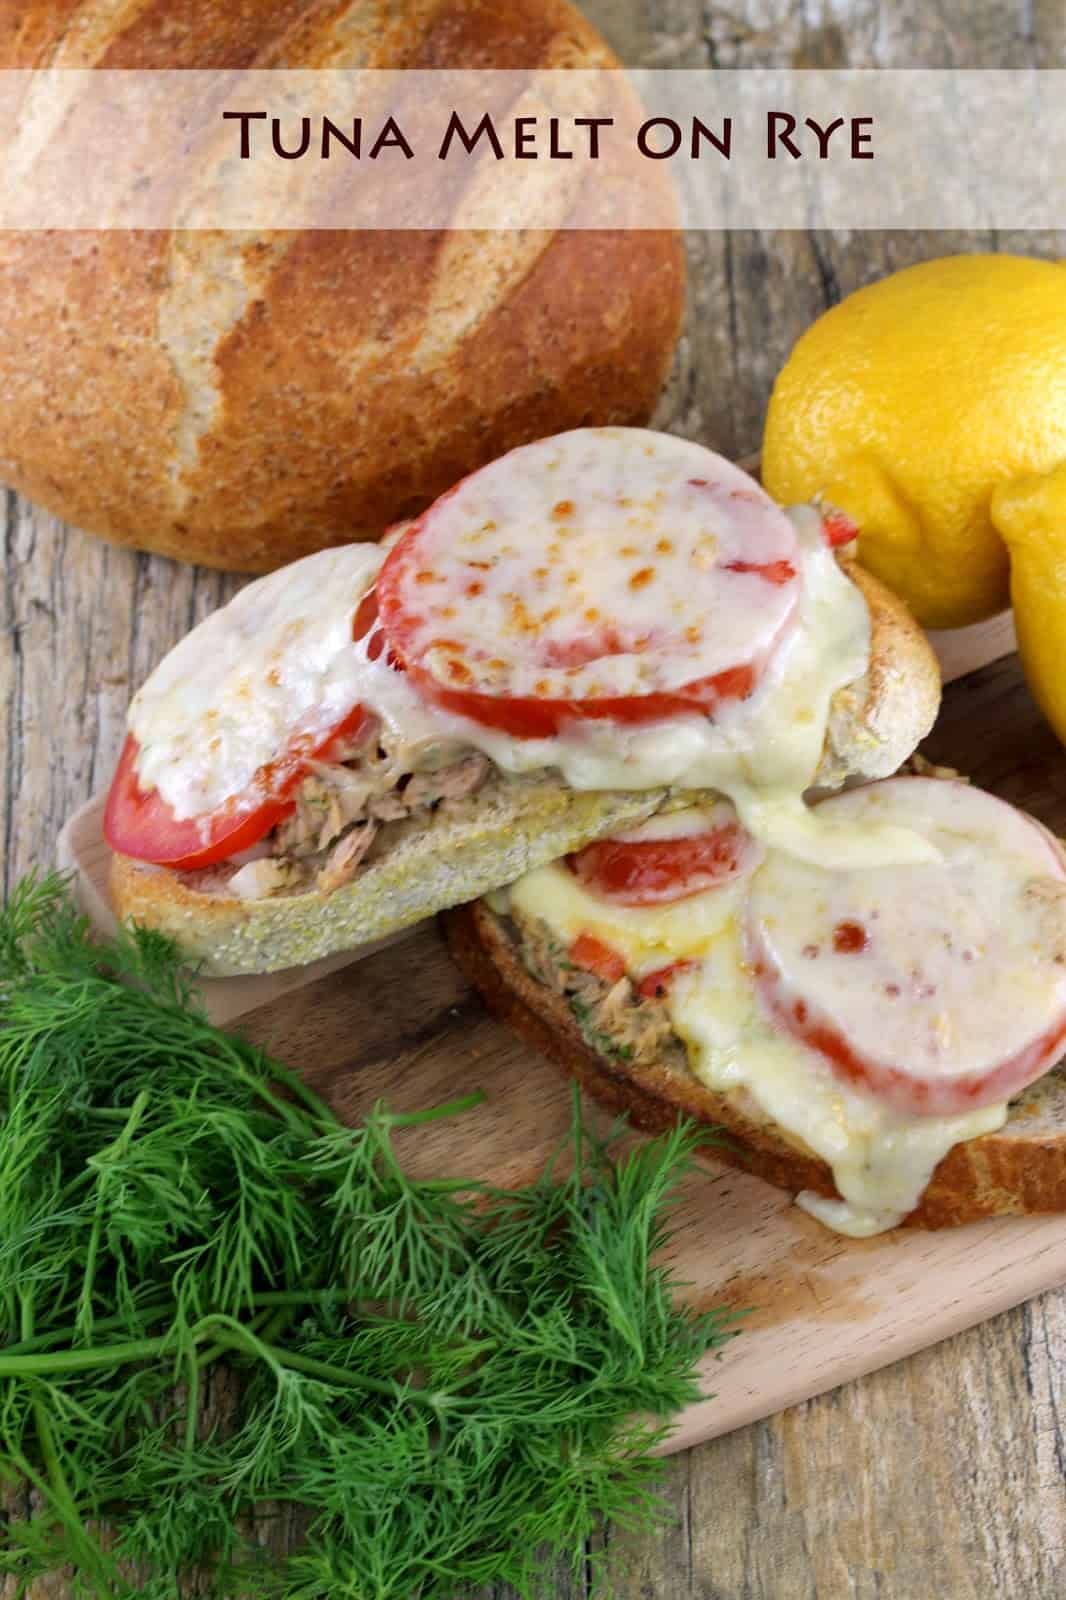 Tuna Melt on Rye: Tuna flavored with fresh dill and sliced tomato stacked on rye bread with bubbly melted cheese